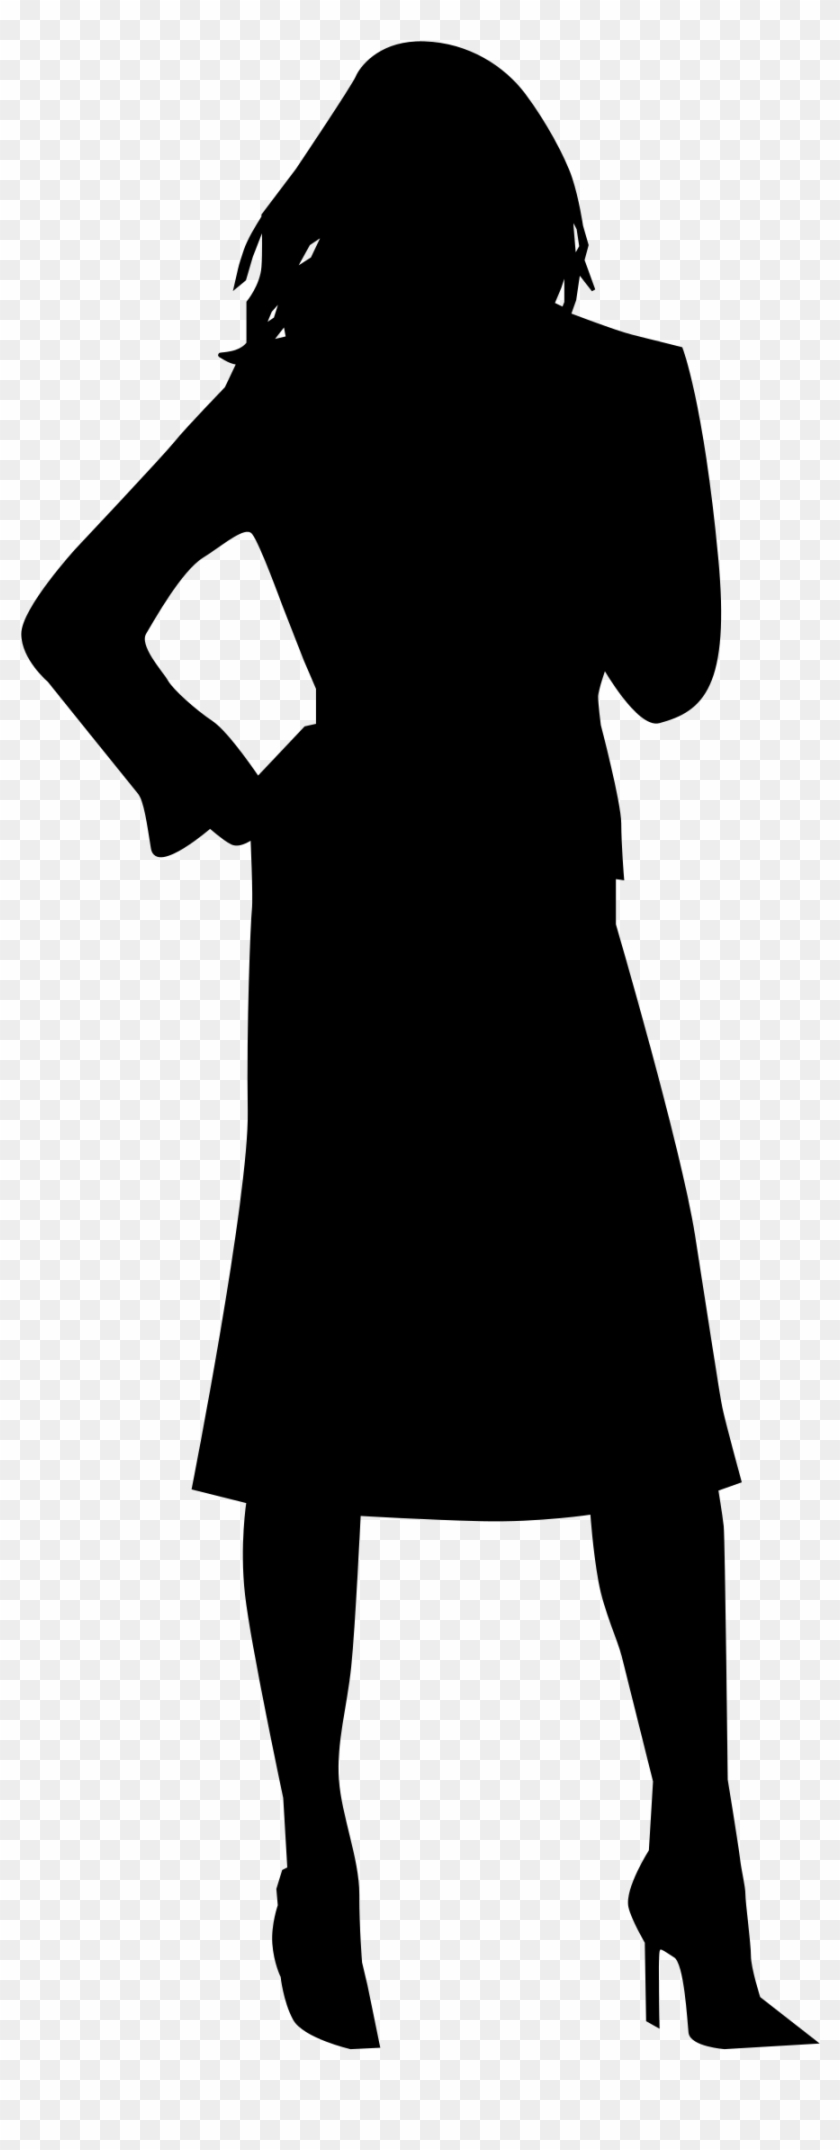 Clipart Free Silhouette - Woman Silhouette Icon Png Transparent Png